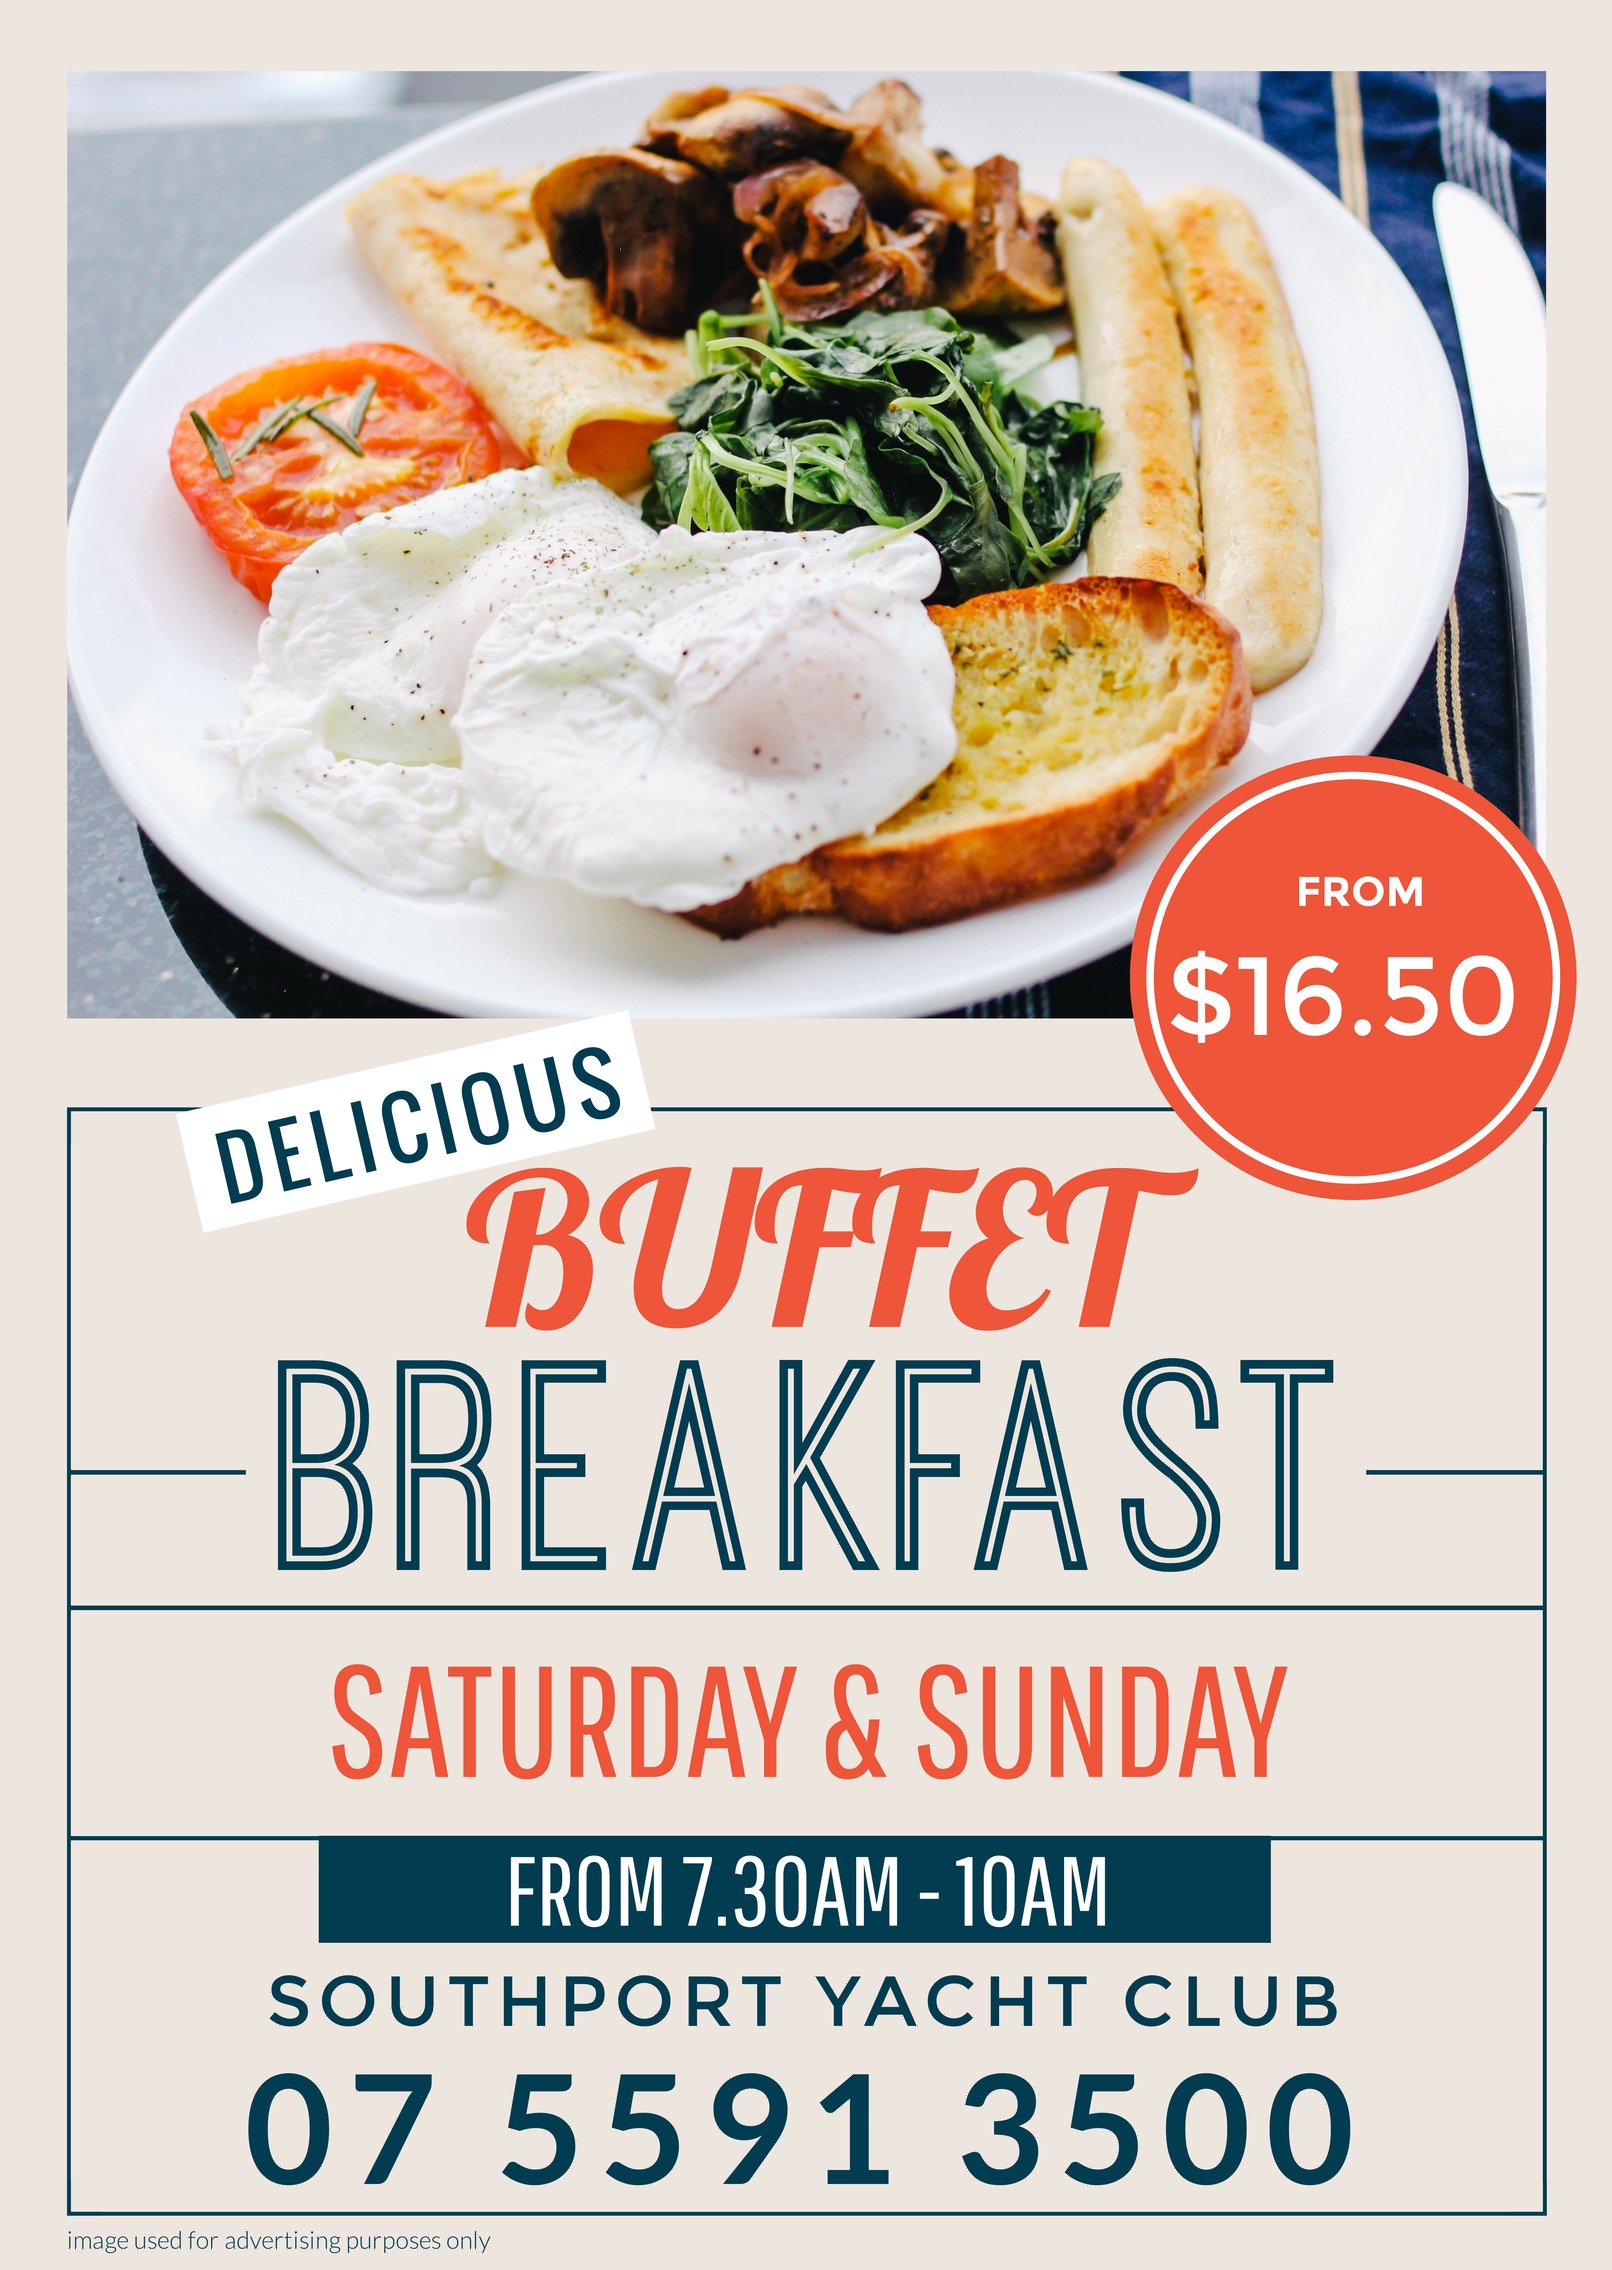 southport yacht club breakfast prices